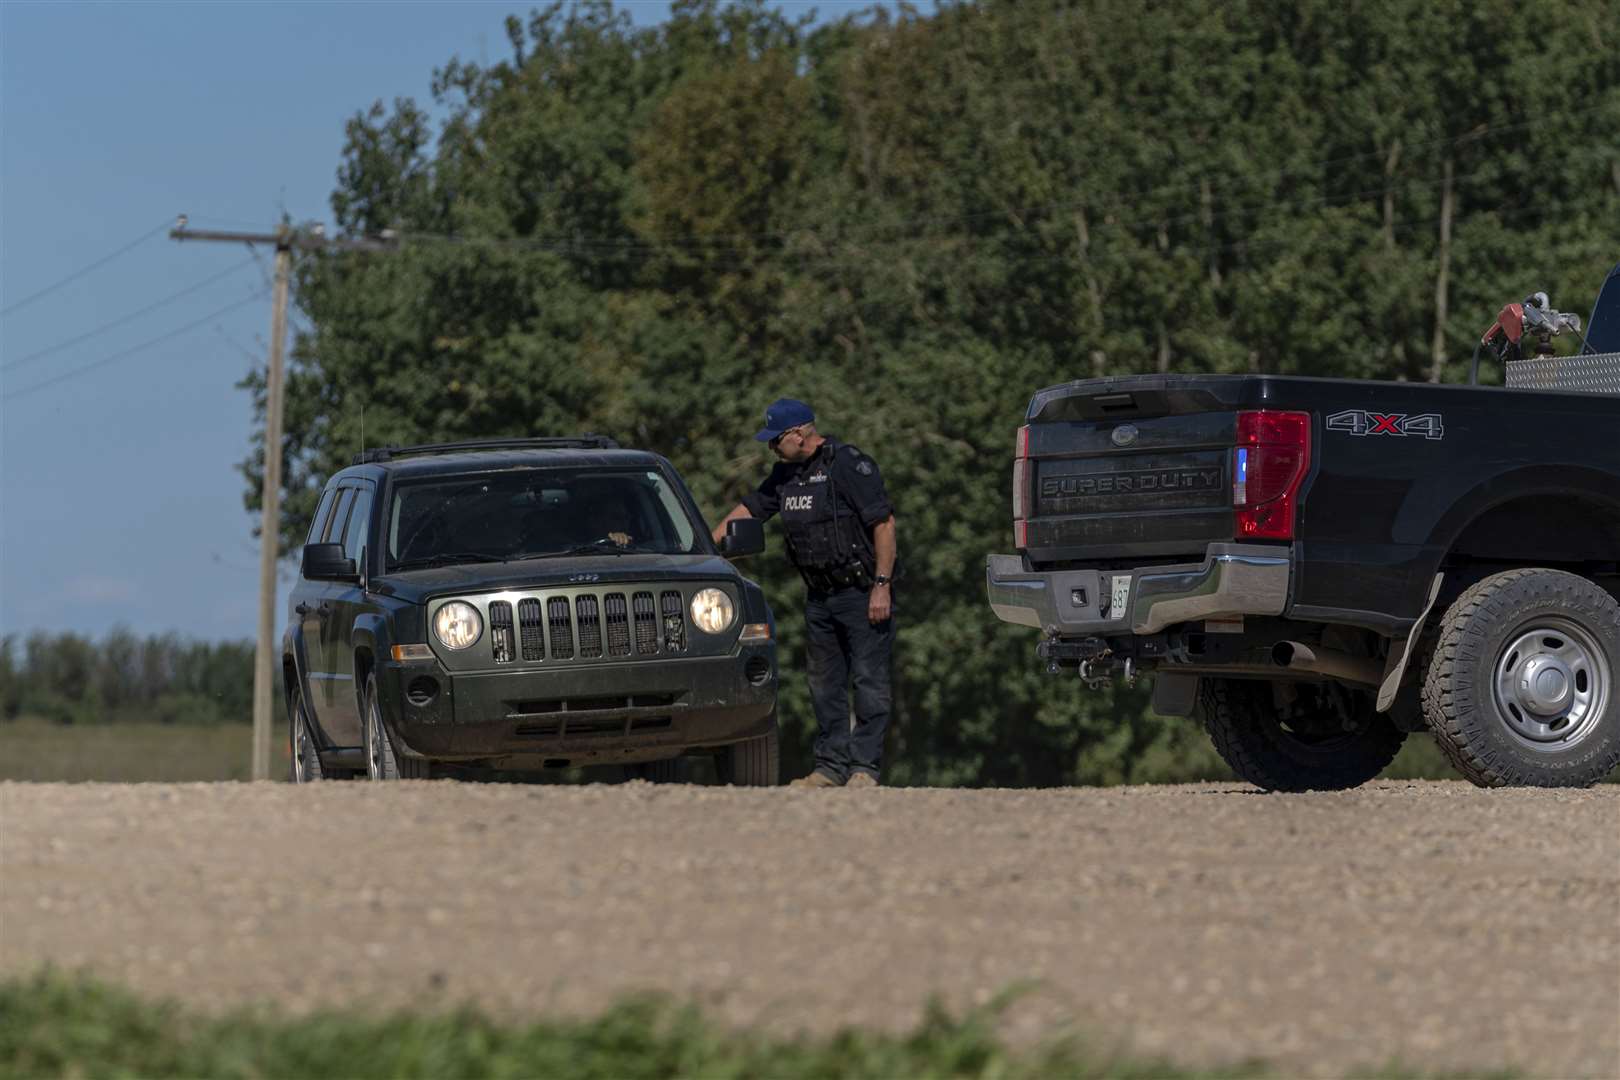 An RCMP officer at a police road block in James Smith Cree Nation, Saskatchewan (Heywood Yu/The Canadian Press via AP)